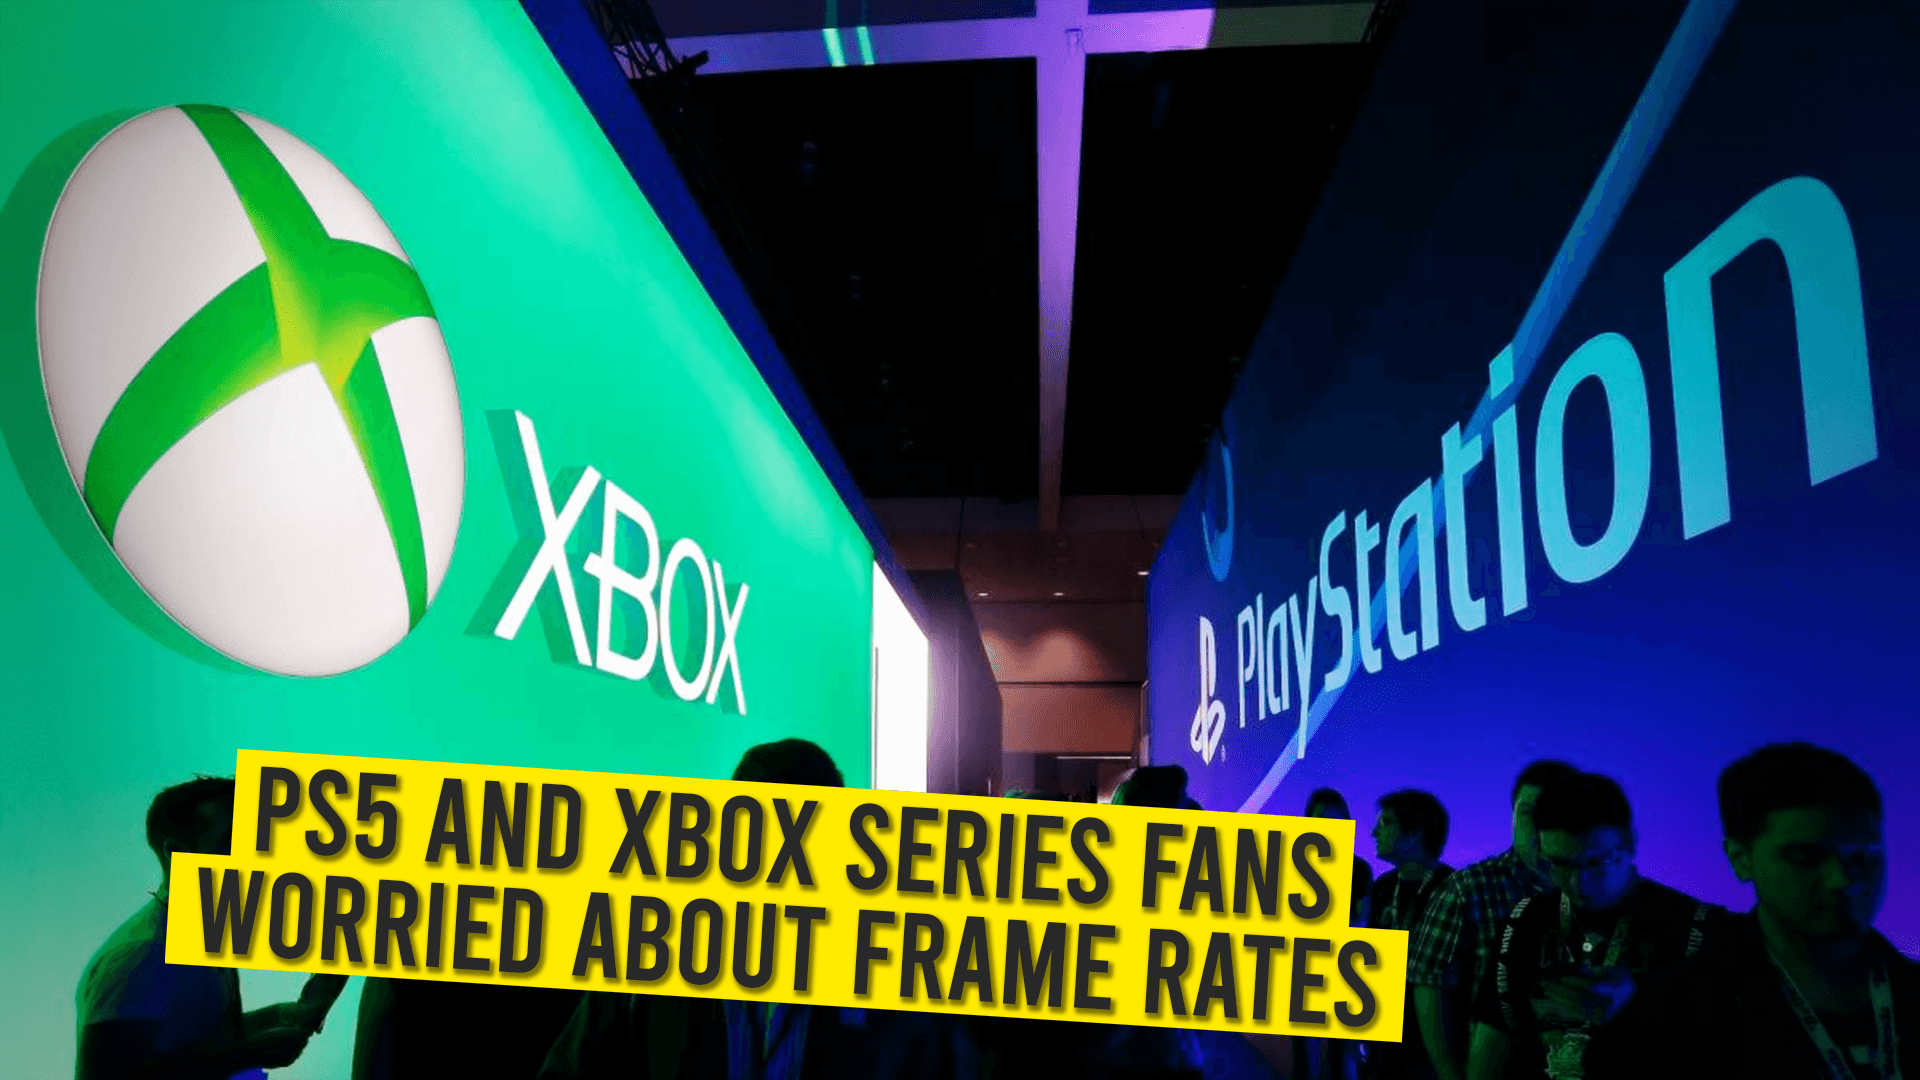 PS5 and XBox Series Fans Worried About Frame Rates